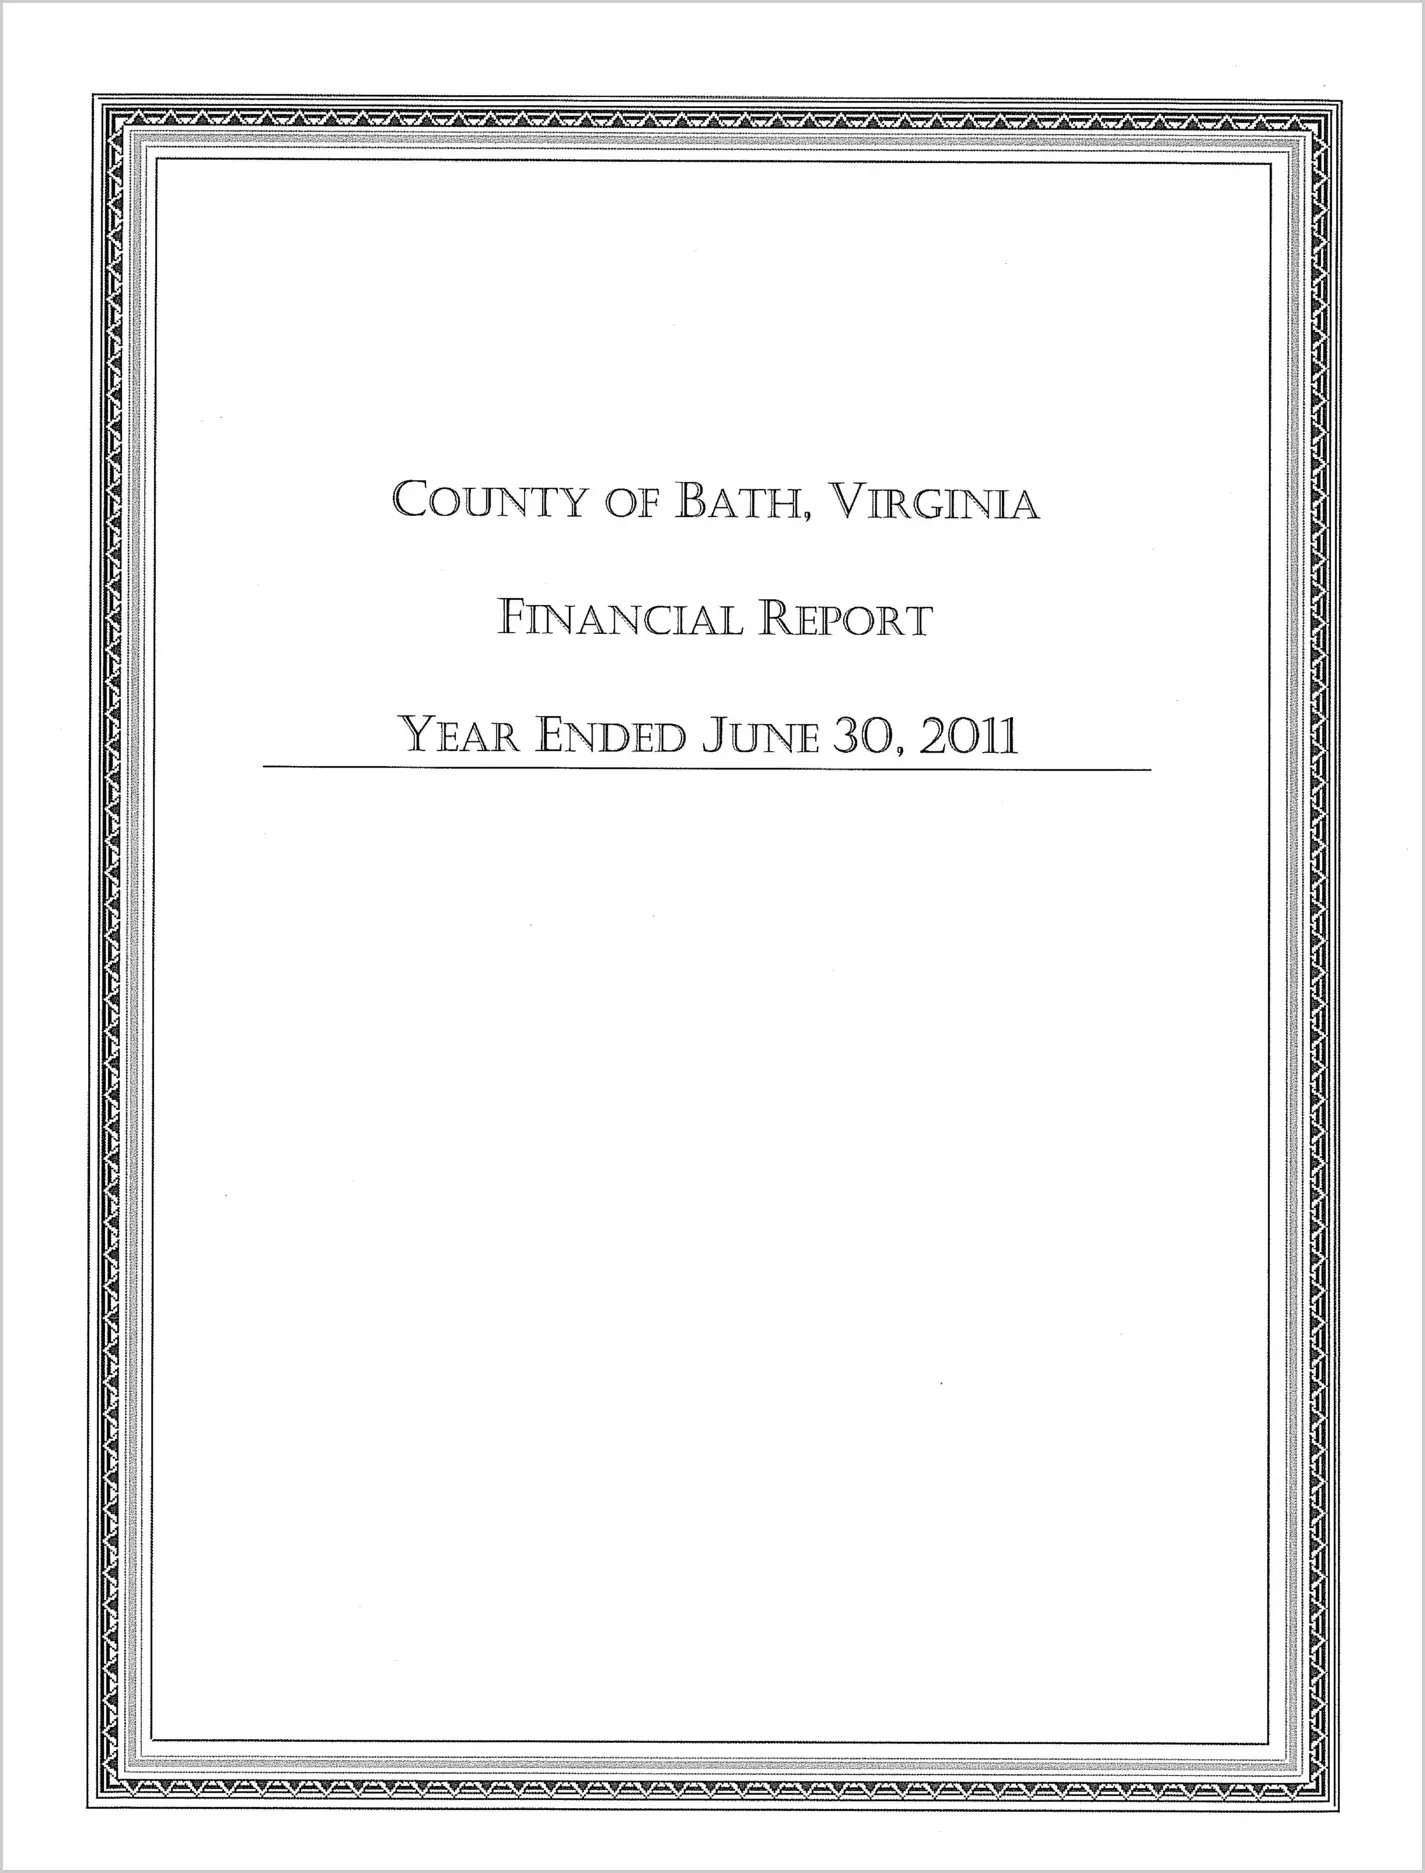 2011 Annual Financial Report for County of Bath